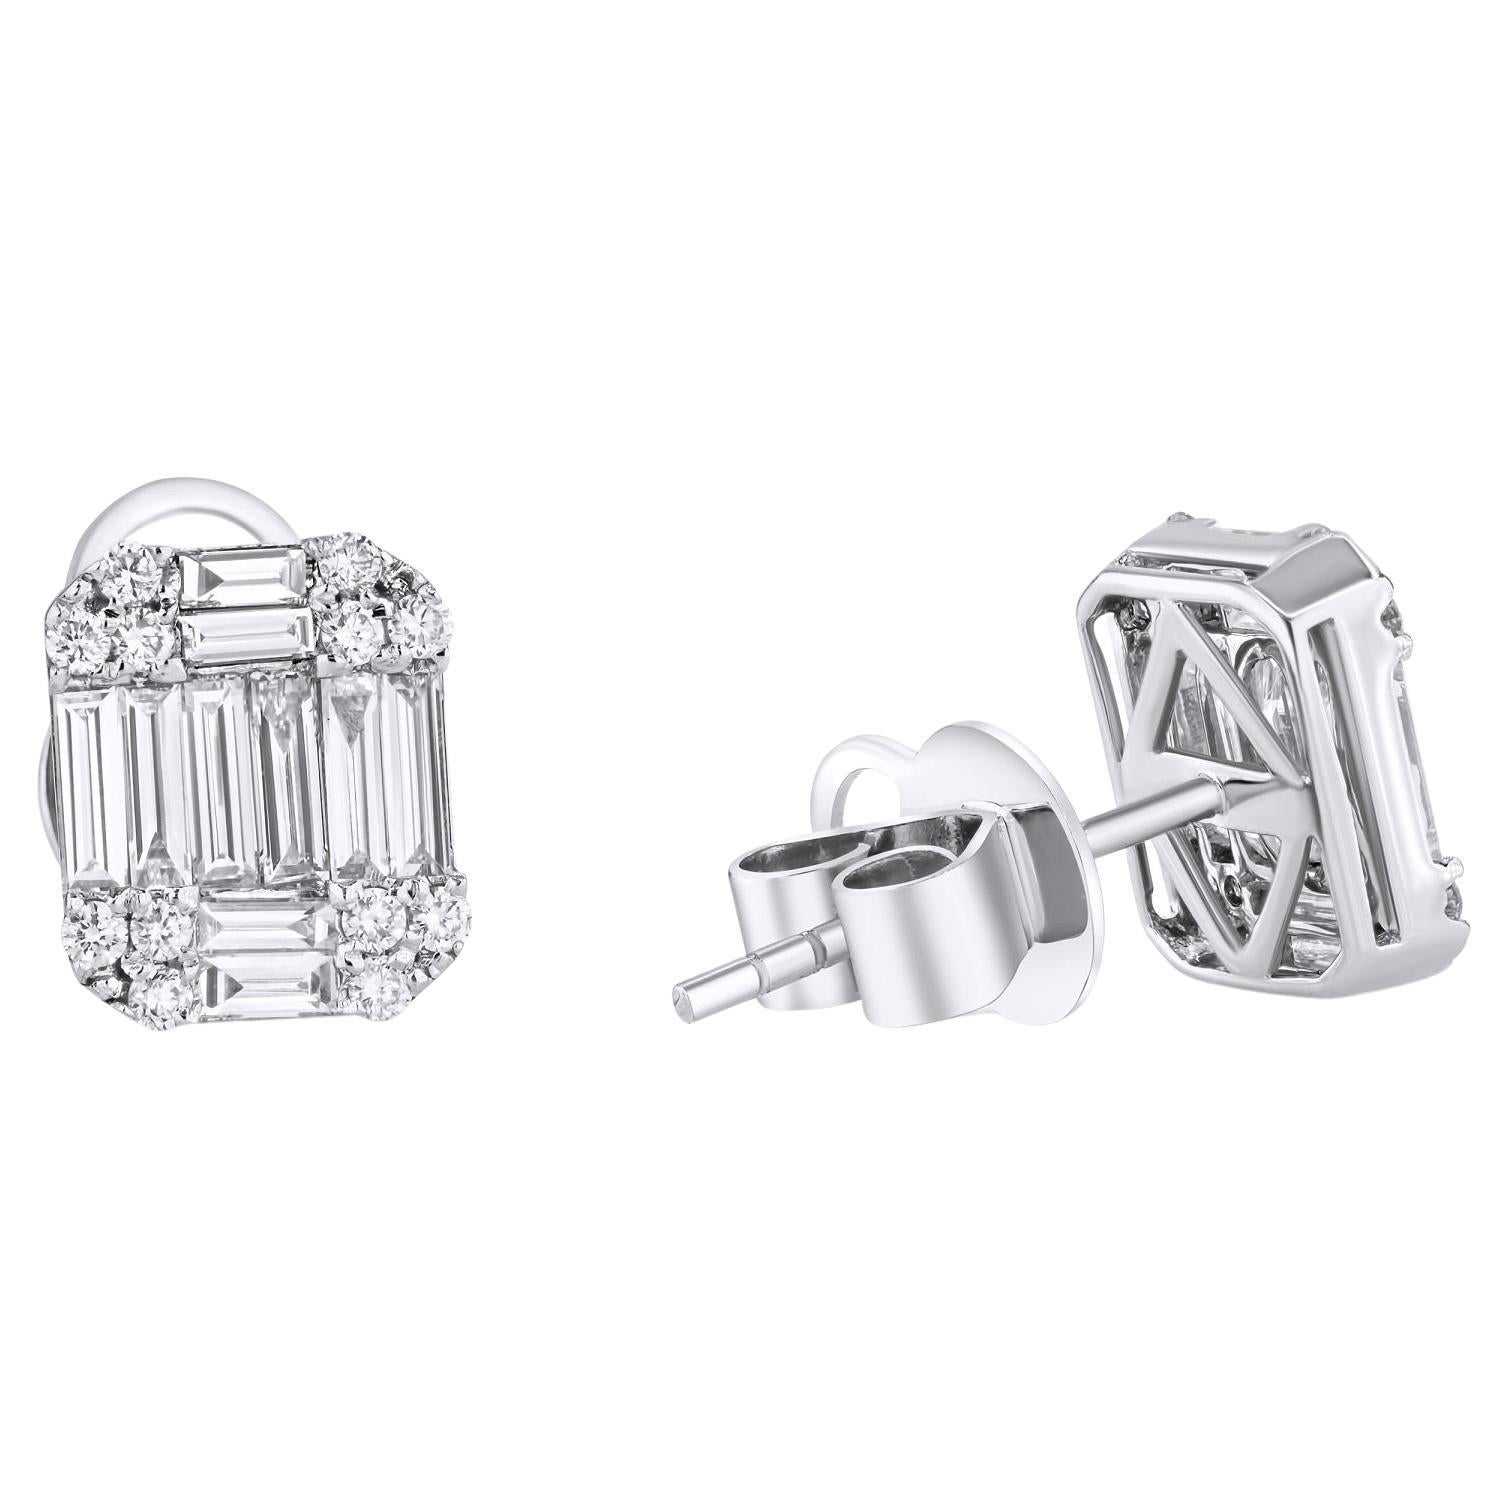 1.04 Carat Round and Baguette Cluster Diamond Stud Earrings in 18k White Gold